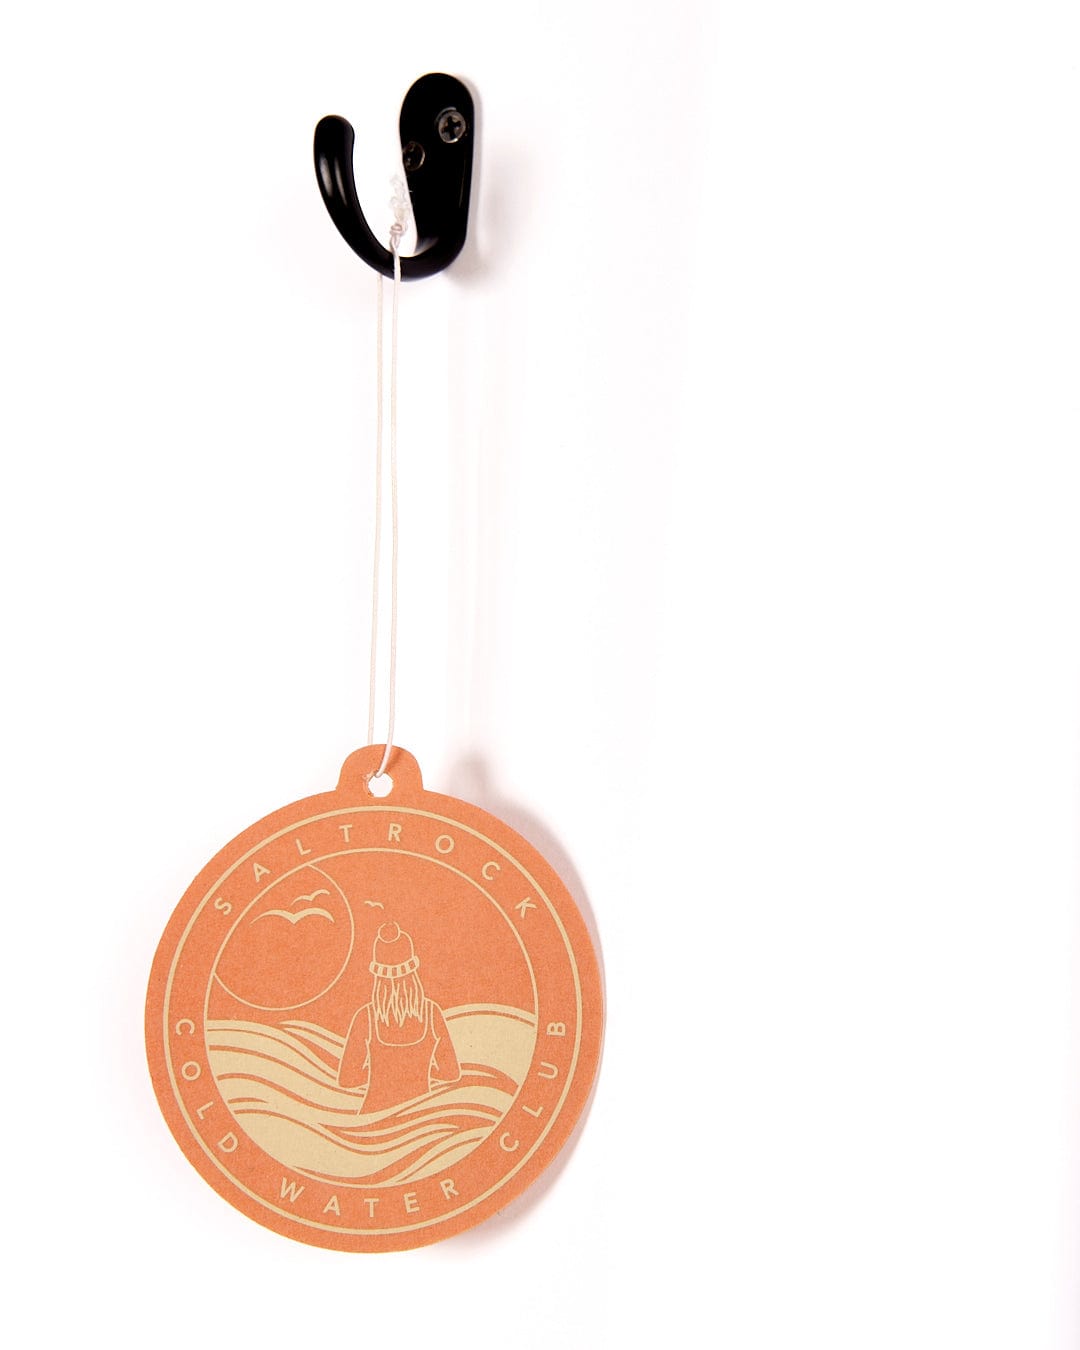 A Cold Water Club coconut-scented air freshener hanging on a hook by Saltrock.